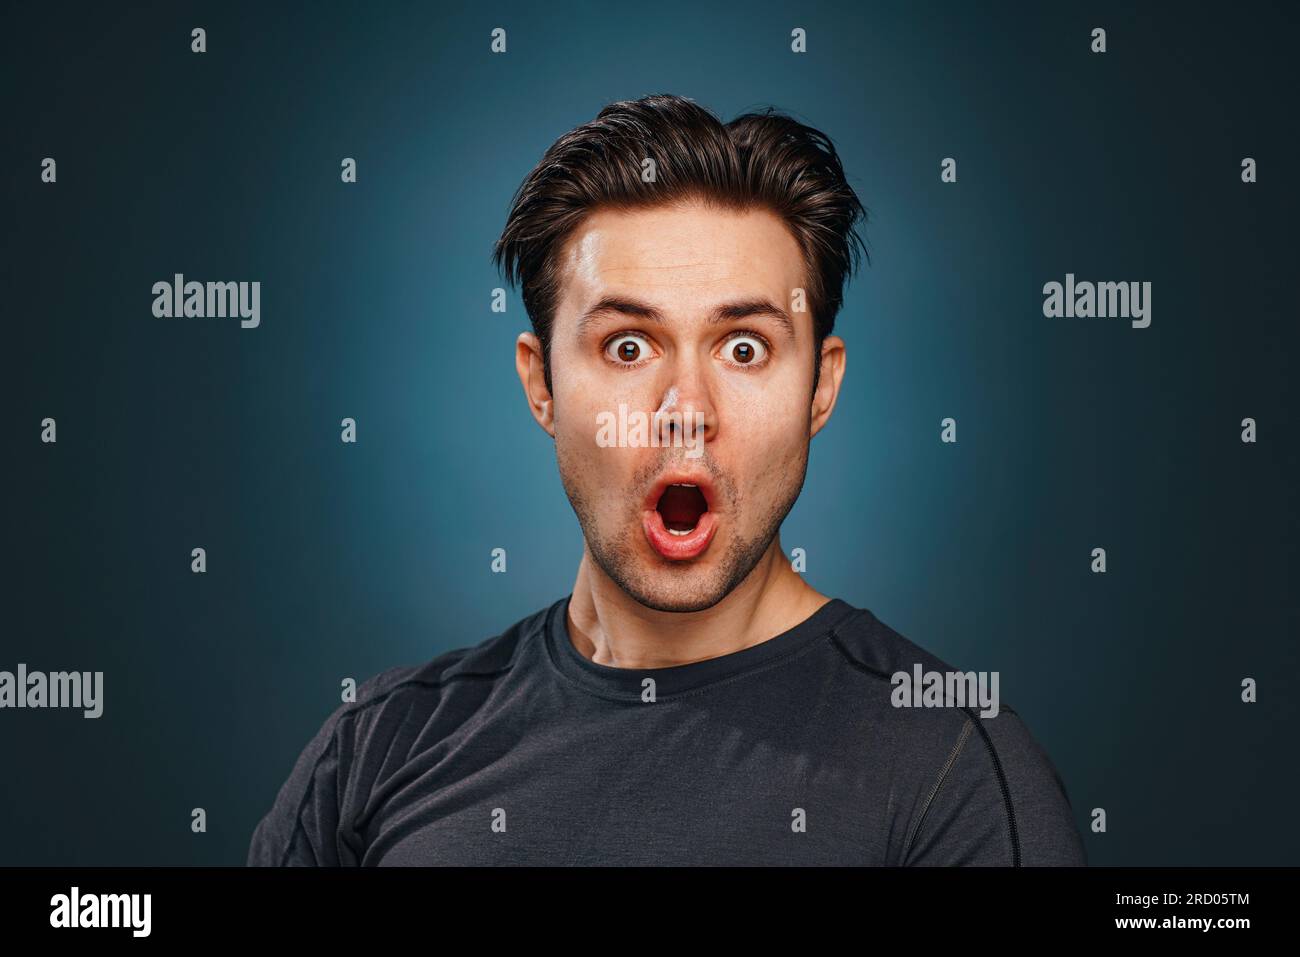 Young man emotional wow portrait Stock Photo